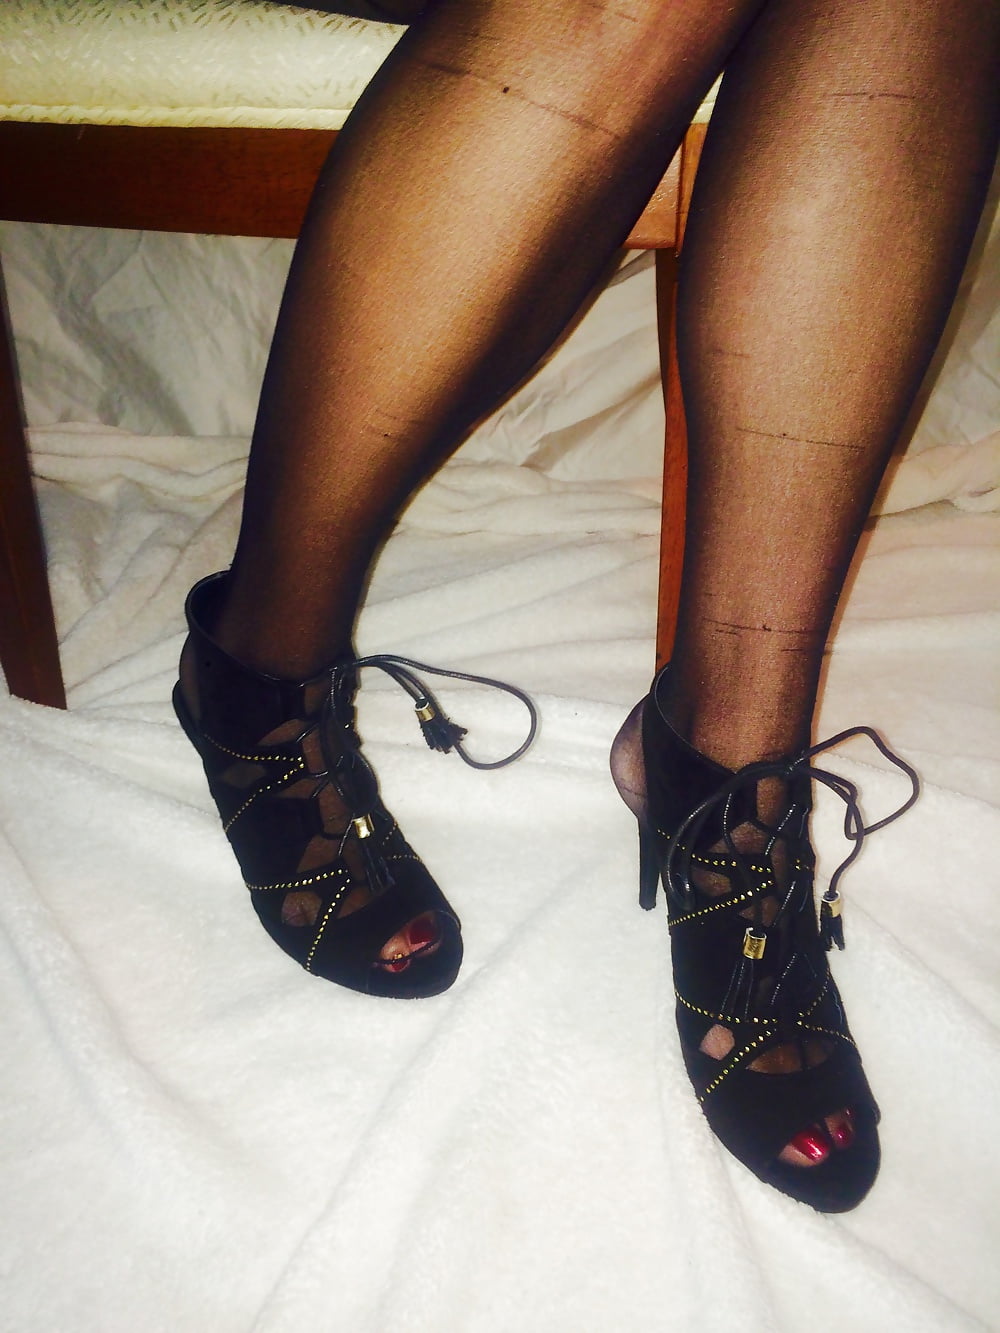 Wife's feet in nylons and her new heels. Tributes welcome! adult photos